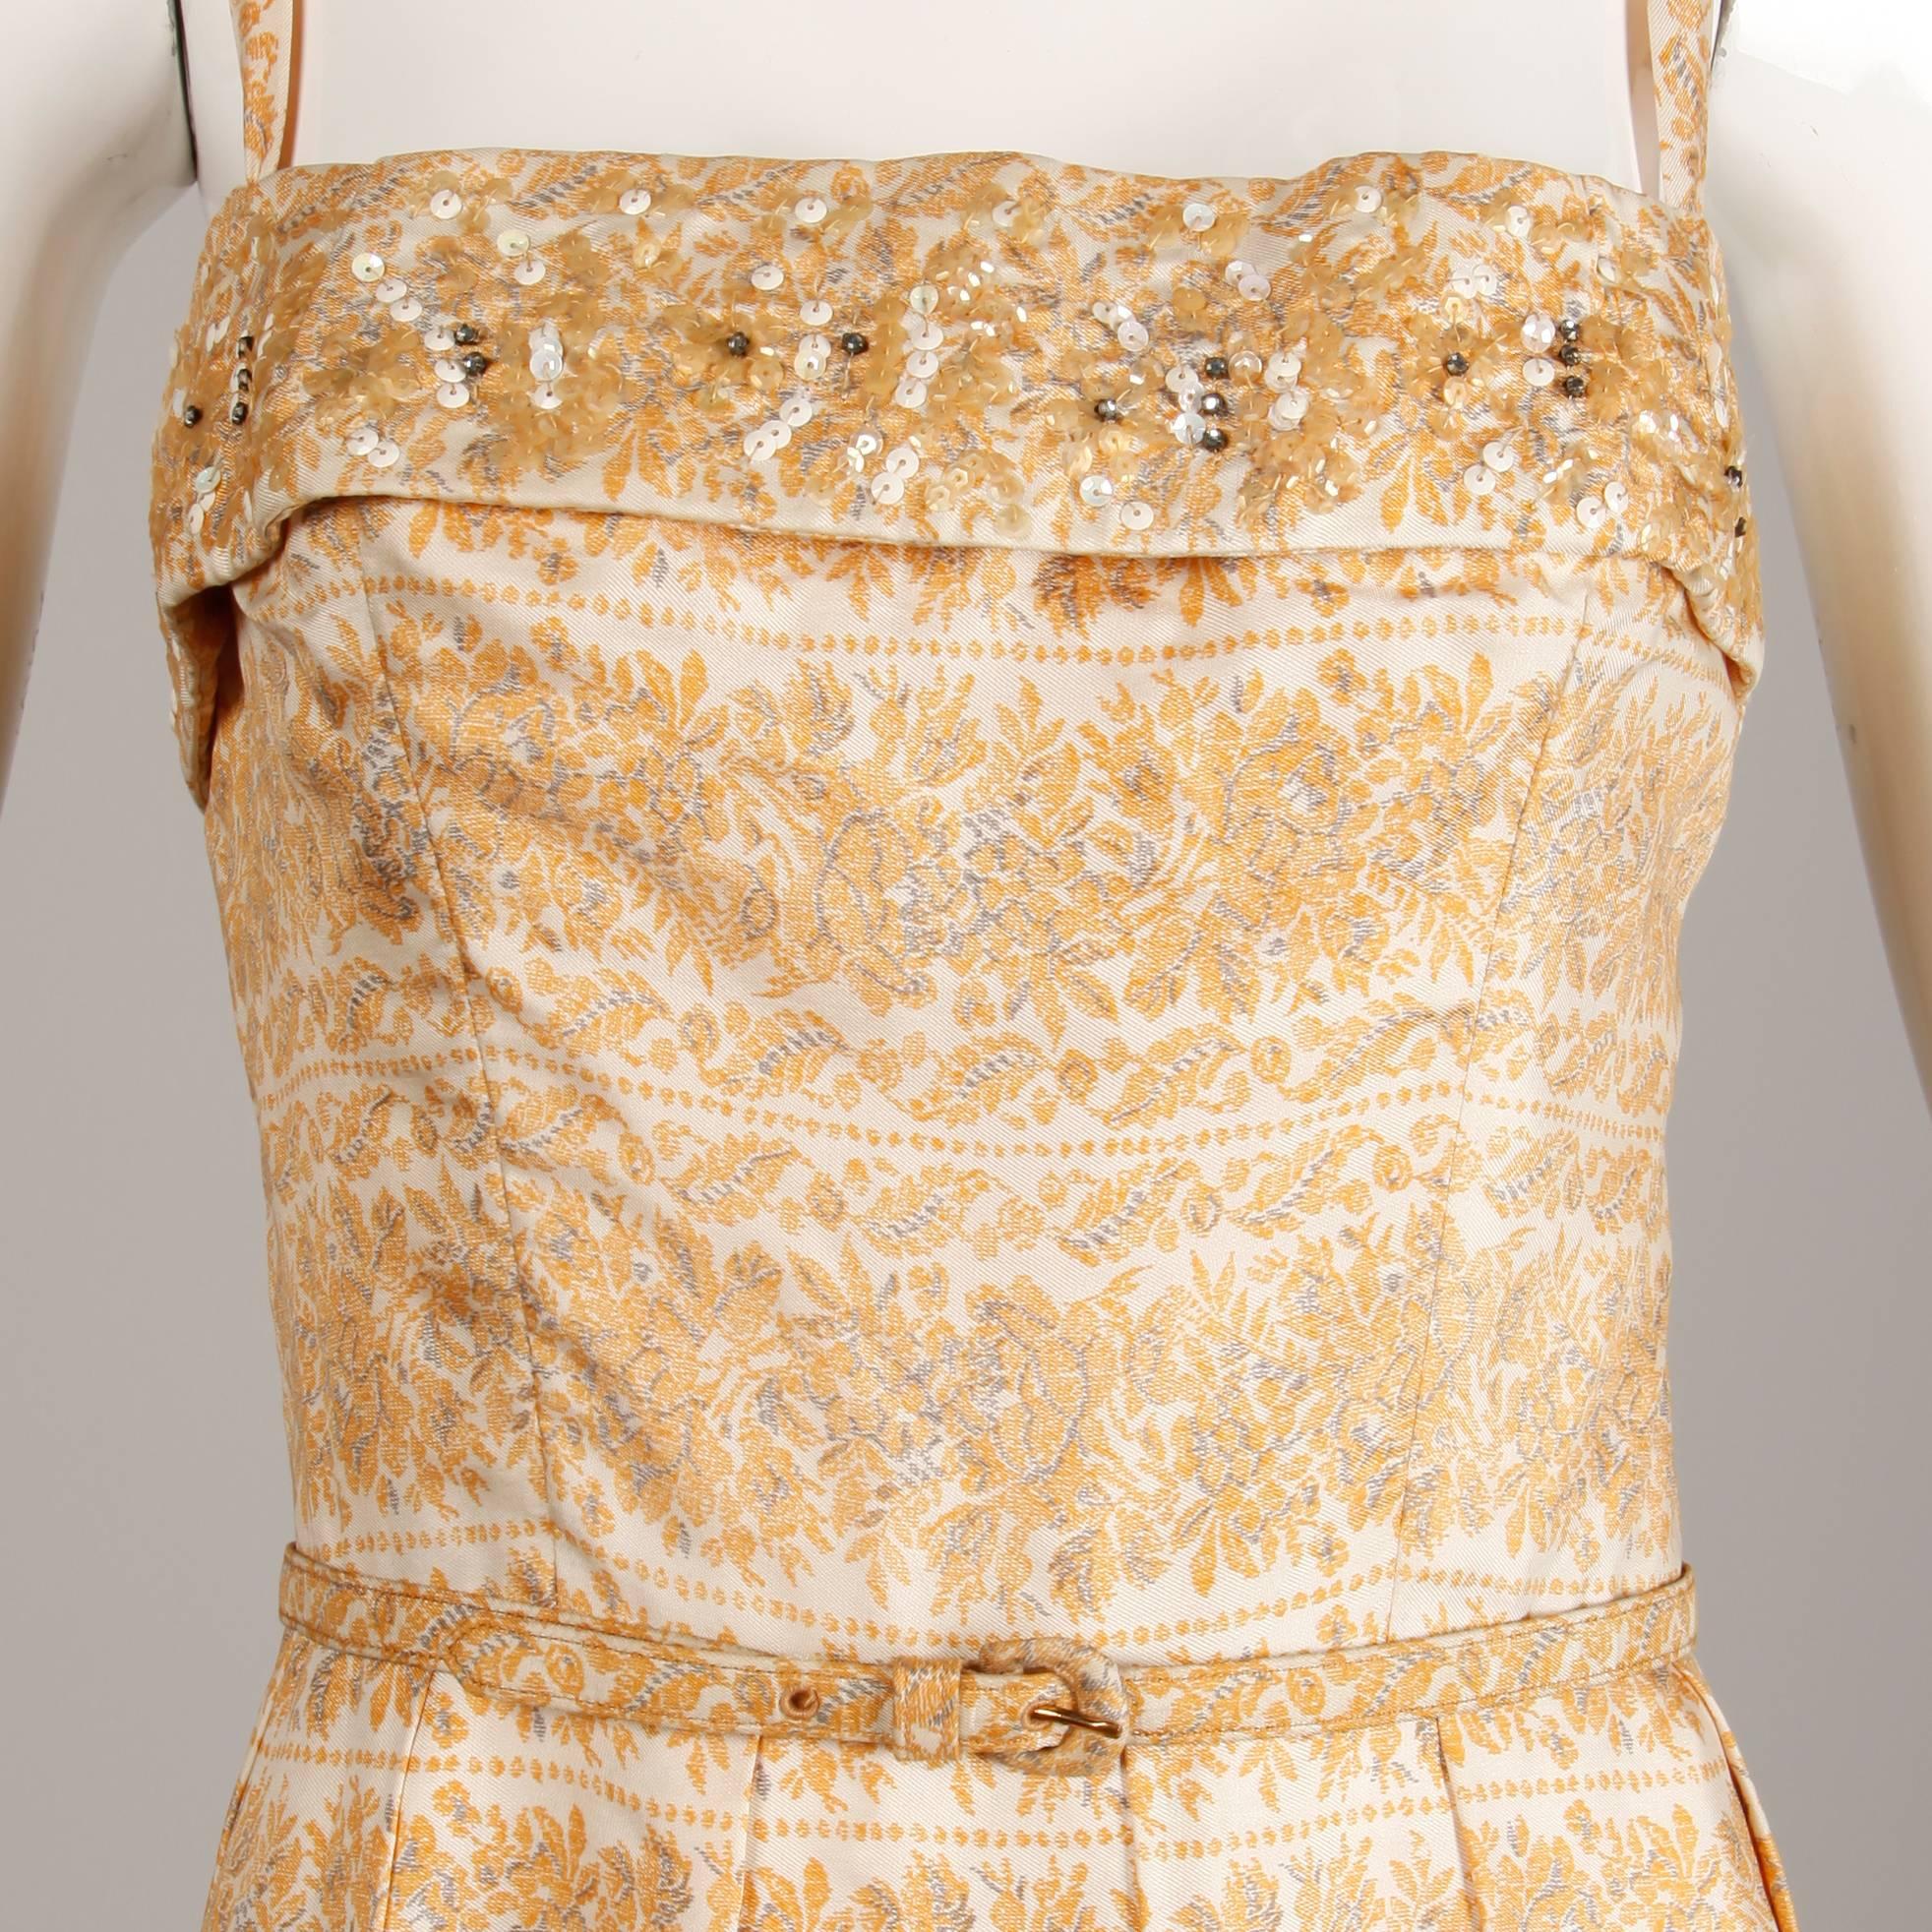 Stunning vintage 1950s silk dress in a mustard yellow floral print by Anna Miller. Sequin, bead, and rhinestone detail across the bust and matching leather backed belt. Box pleats and covered buttons up the back. Partially lined with rear metal zip